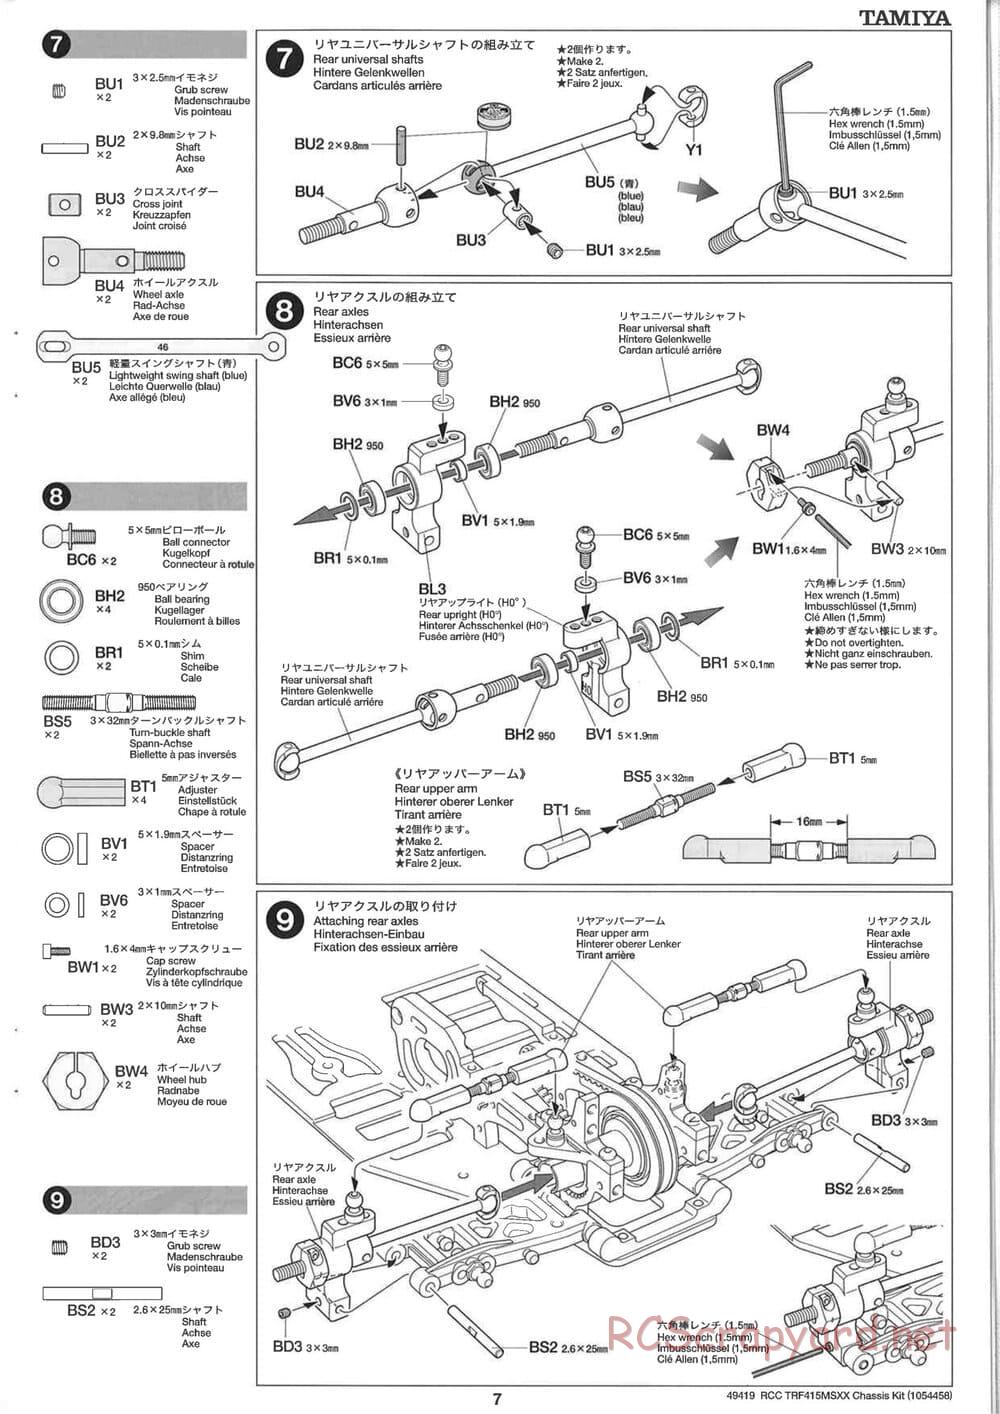 Tamiya - TRF415-MSXX Chassis - Manual - Page 7